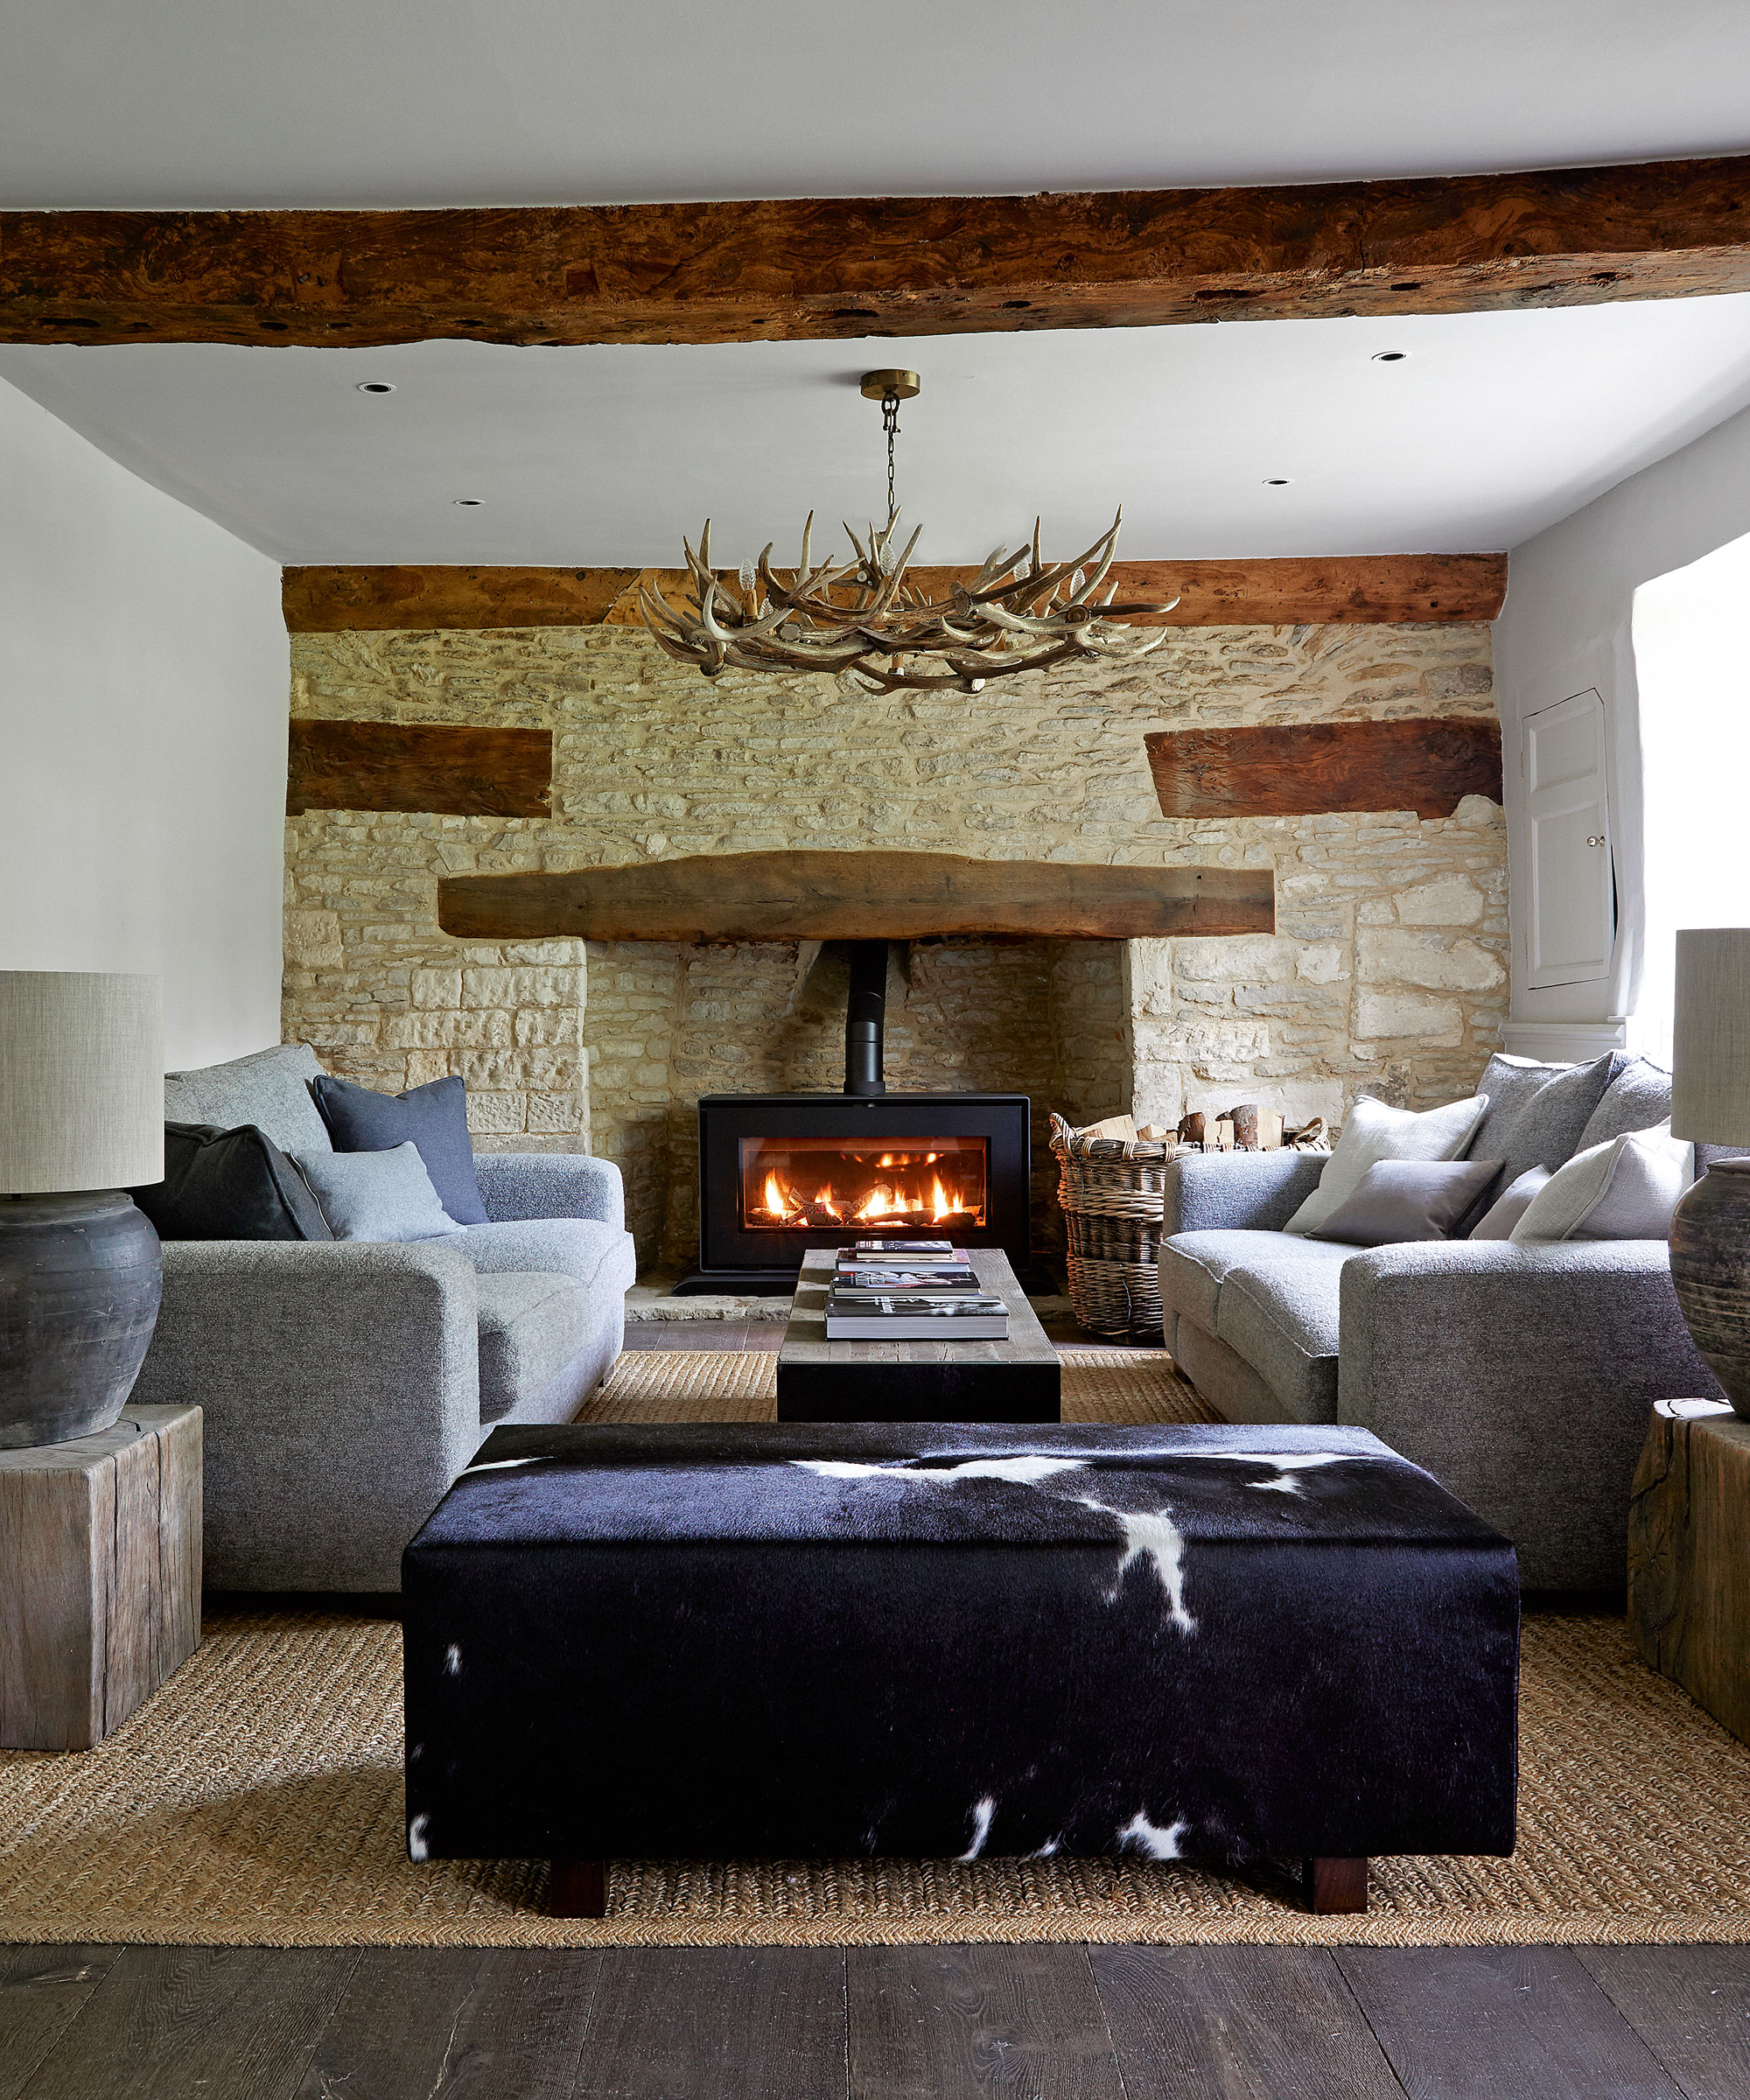 This Cotswolds manor house has a chalet-inspired interior with a twist